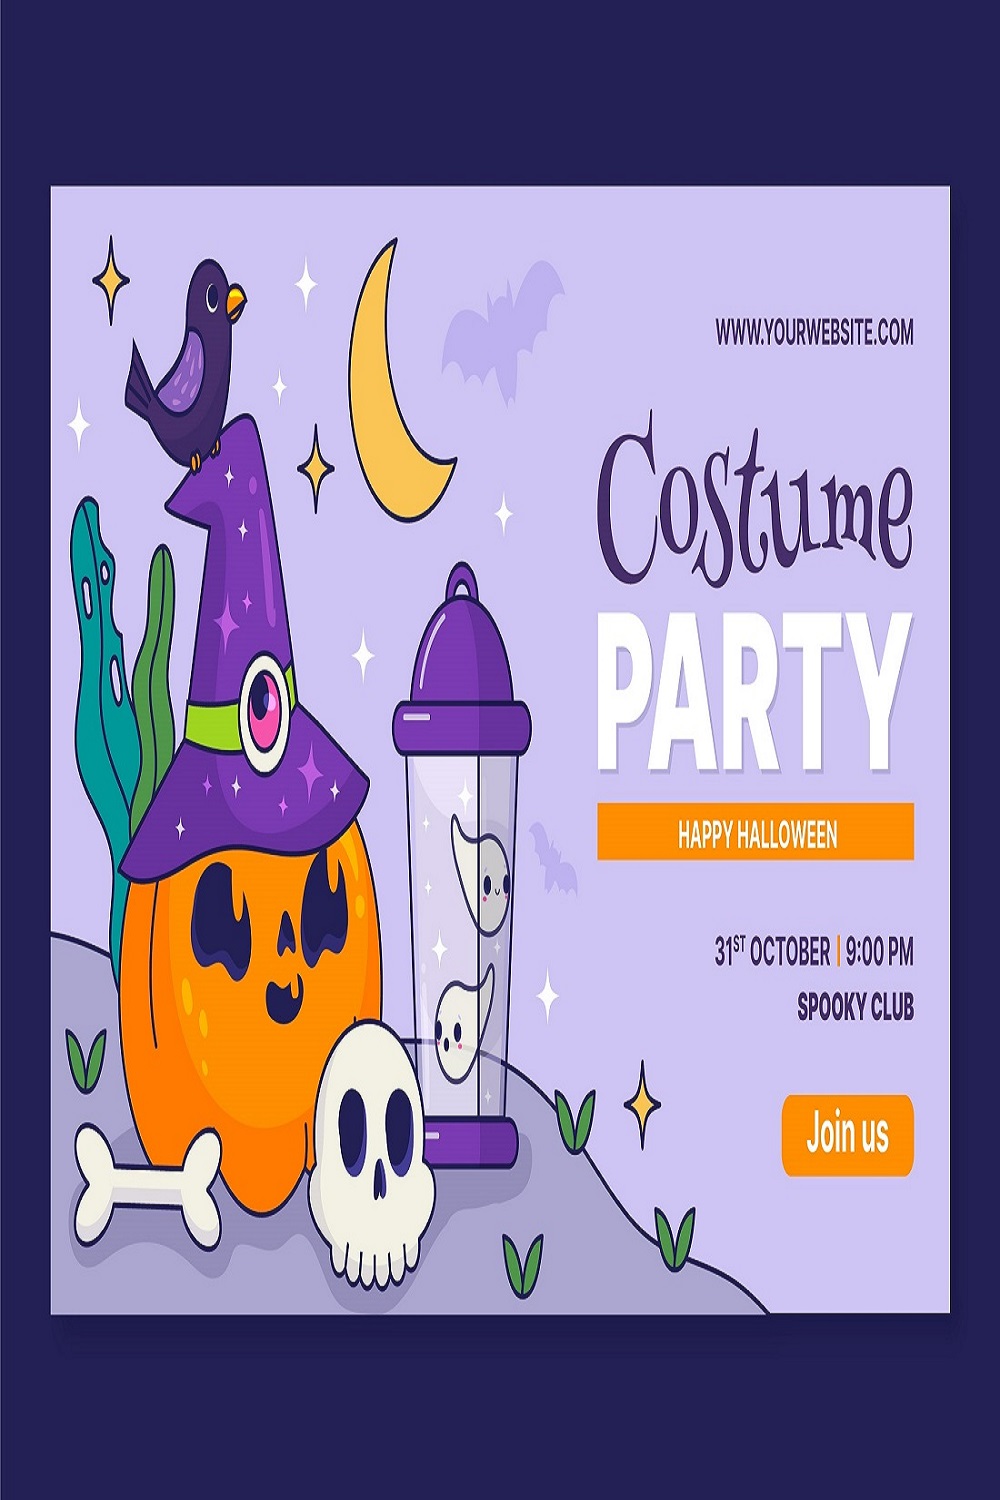 Funny and Cute Ghost Halloween Background Coloring Set Outline for Kids and  Adult Activity - MasterBundles